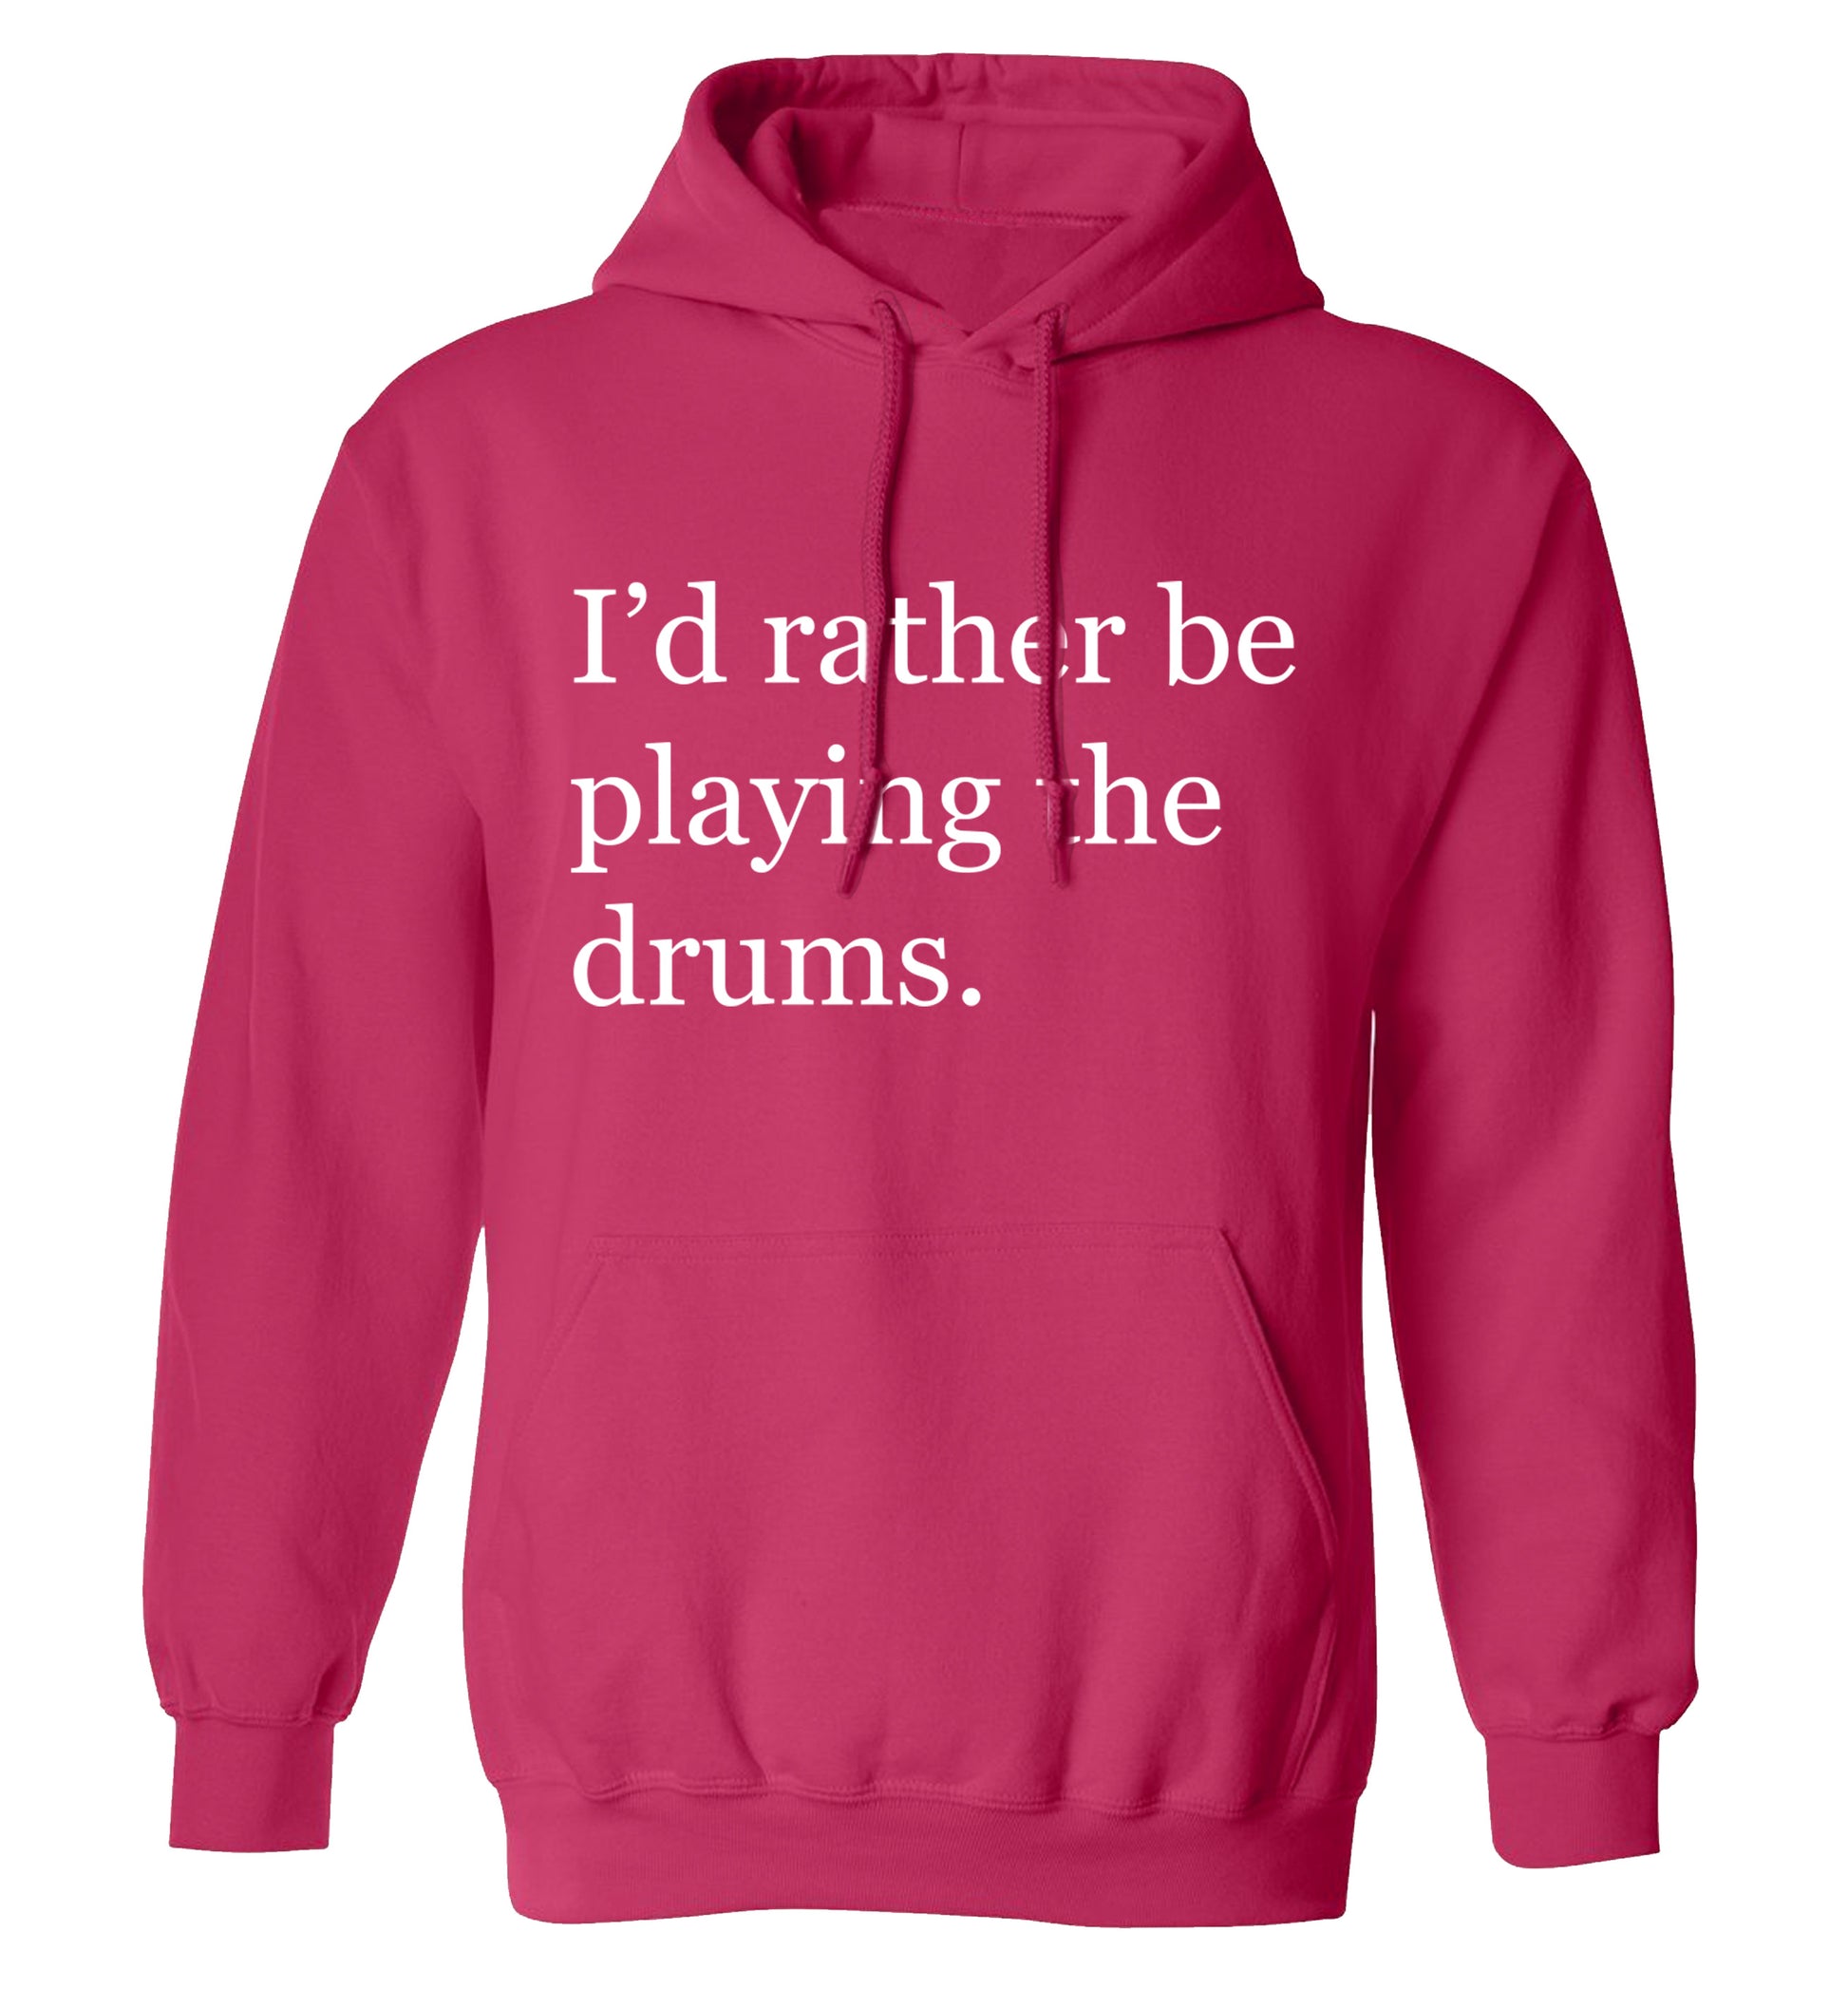 I'd rather be playing the drums adults unisexpink hoodie 2XL